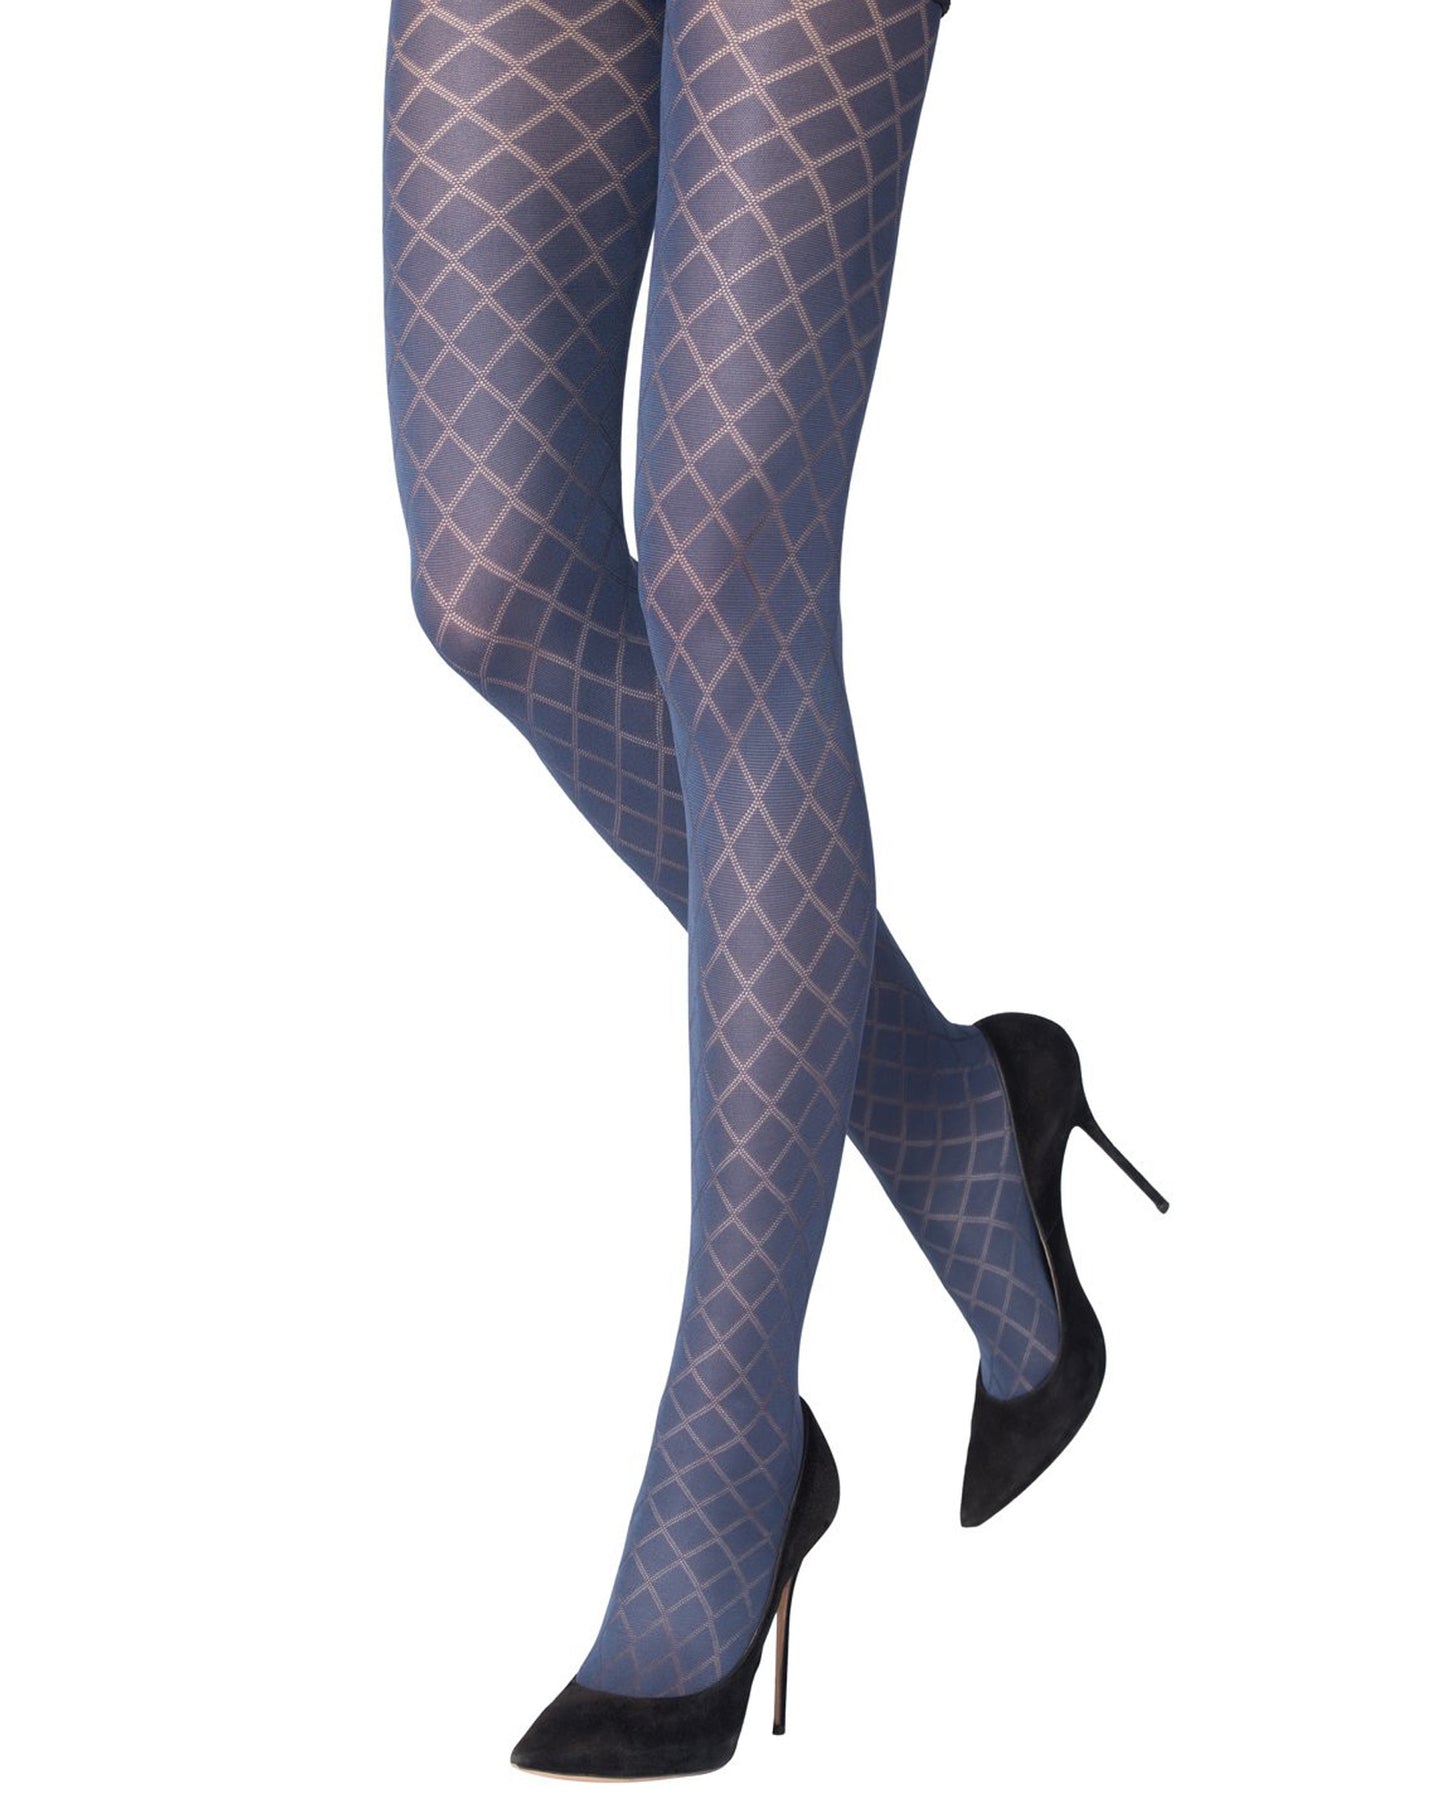 Emilio Cavallini Jacquard Diamonds Tights - Soft matte navy blue opaque patterned tights with a sheer linear diamond pattern, flat seams and gusset. 